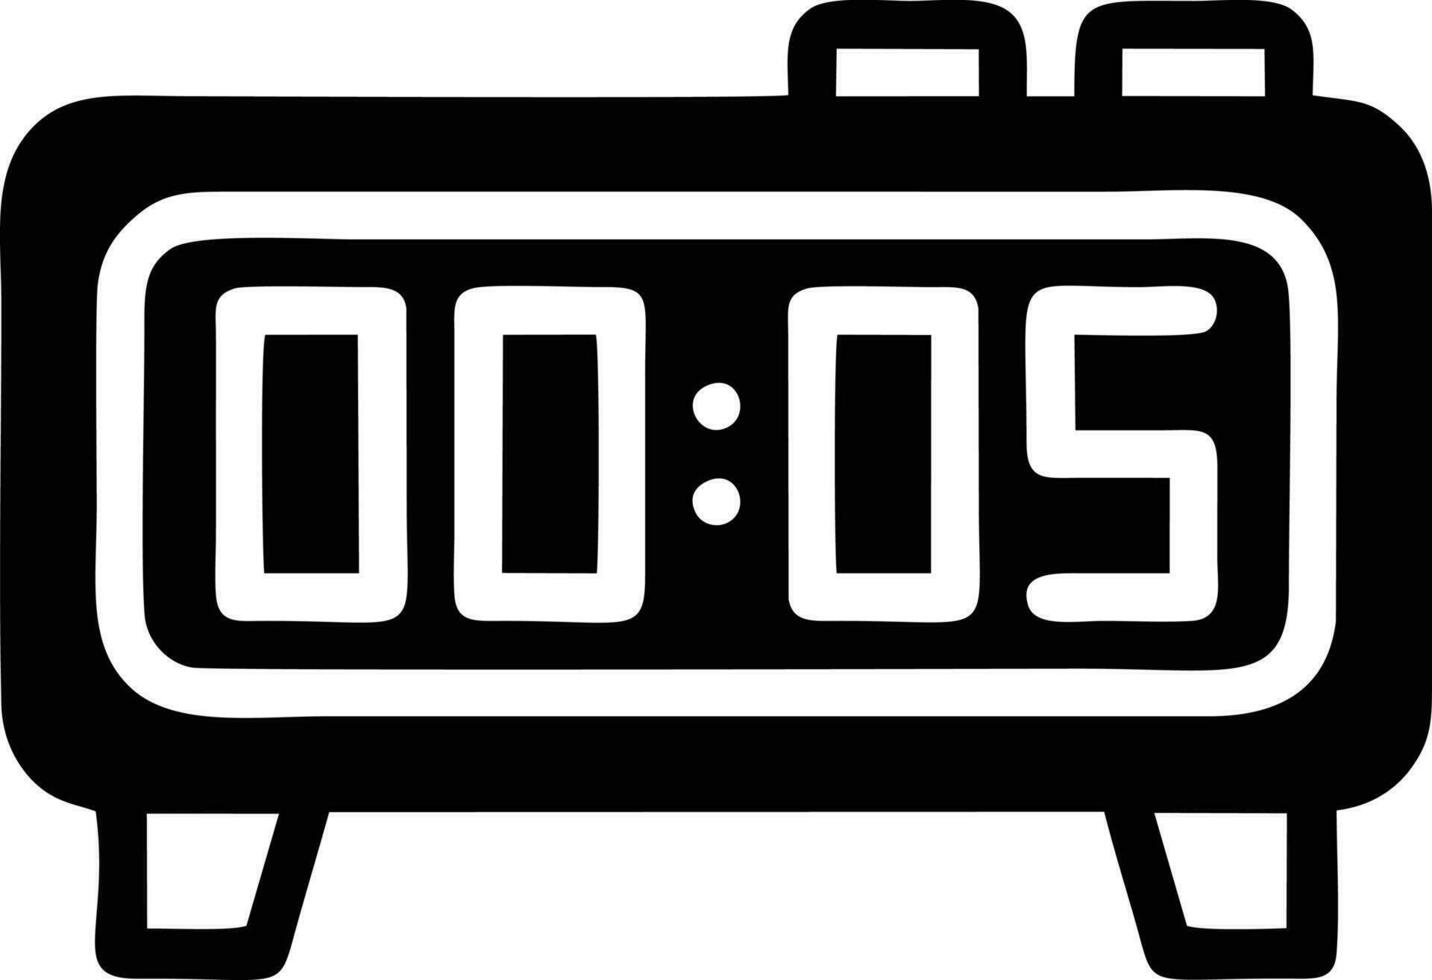 Clock icon symbol design image. Illustration of the alarm watch time isolated vector image. EPS 10